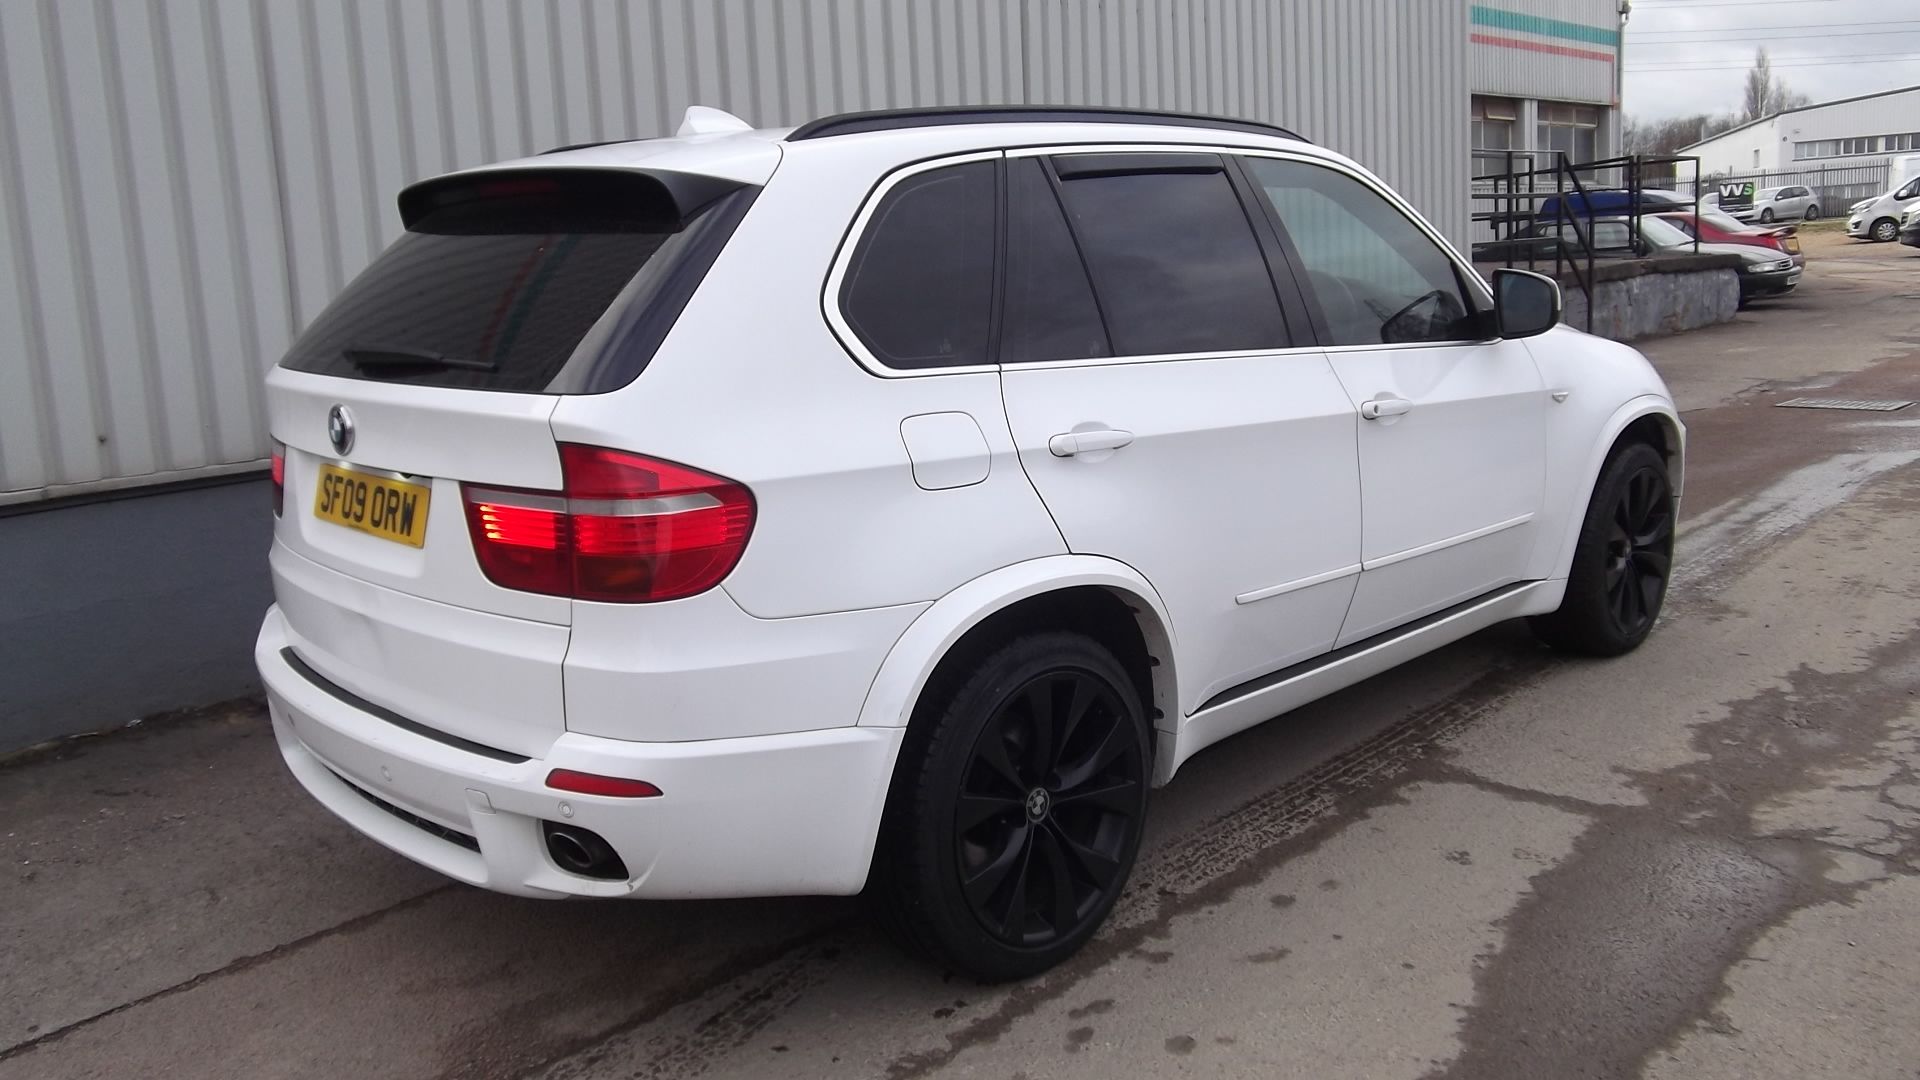 2009 BMW X5 35D M Sport X Drive 3.0 5 Dr 4x4 - CL505 - NO VAT ON THE HAMM - Image 20 of 22